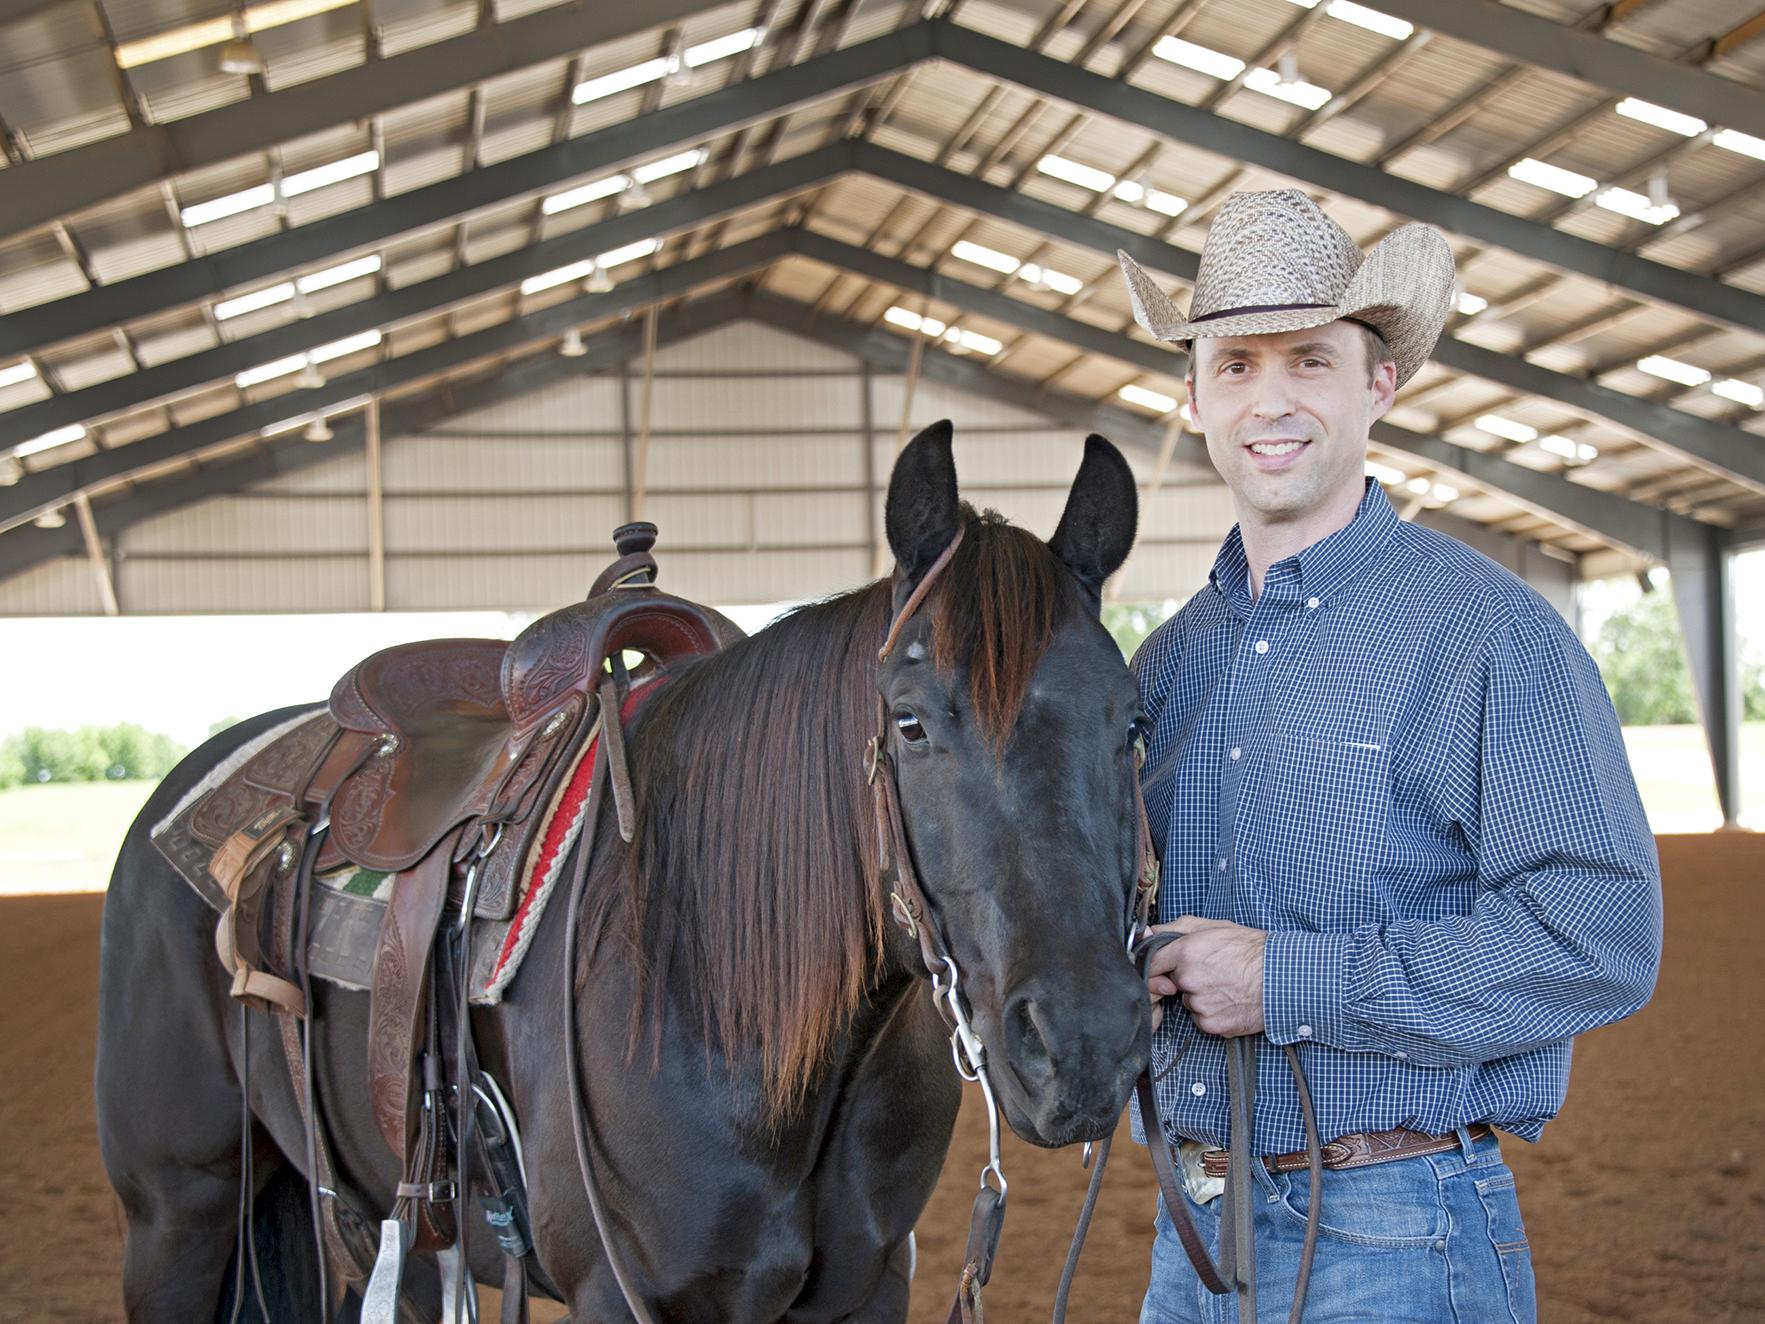 Mississippi State University Extension Service equine specialist Clay Cavinder will assist in the Horse Management: 101 classes from April 11 to May 16 at the Lee County Agri-Center in Verona. (File photo by MSU Extension Service/Kat Lawrence)